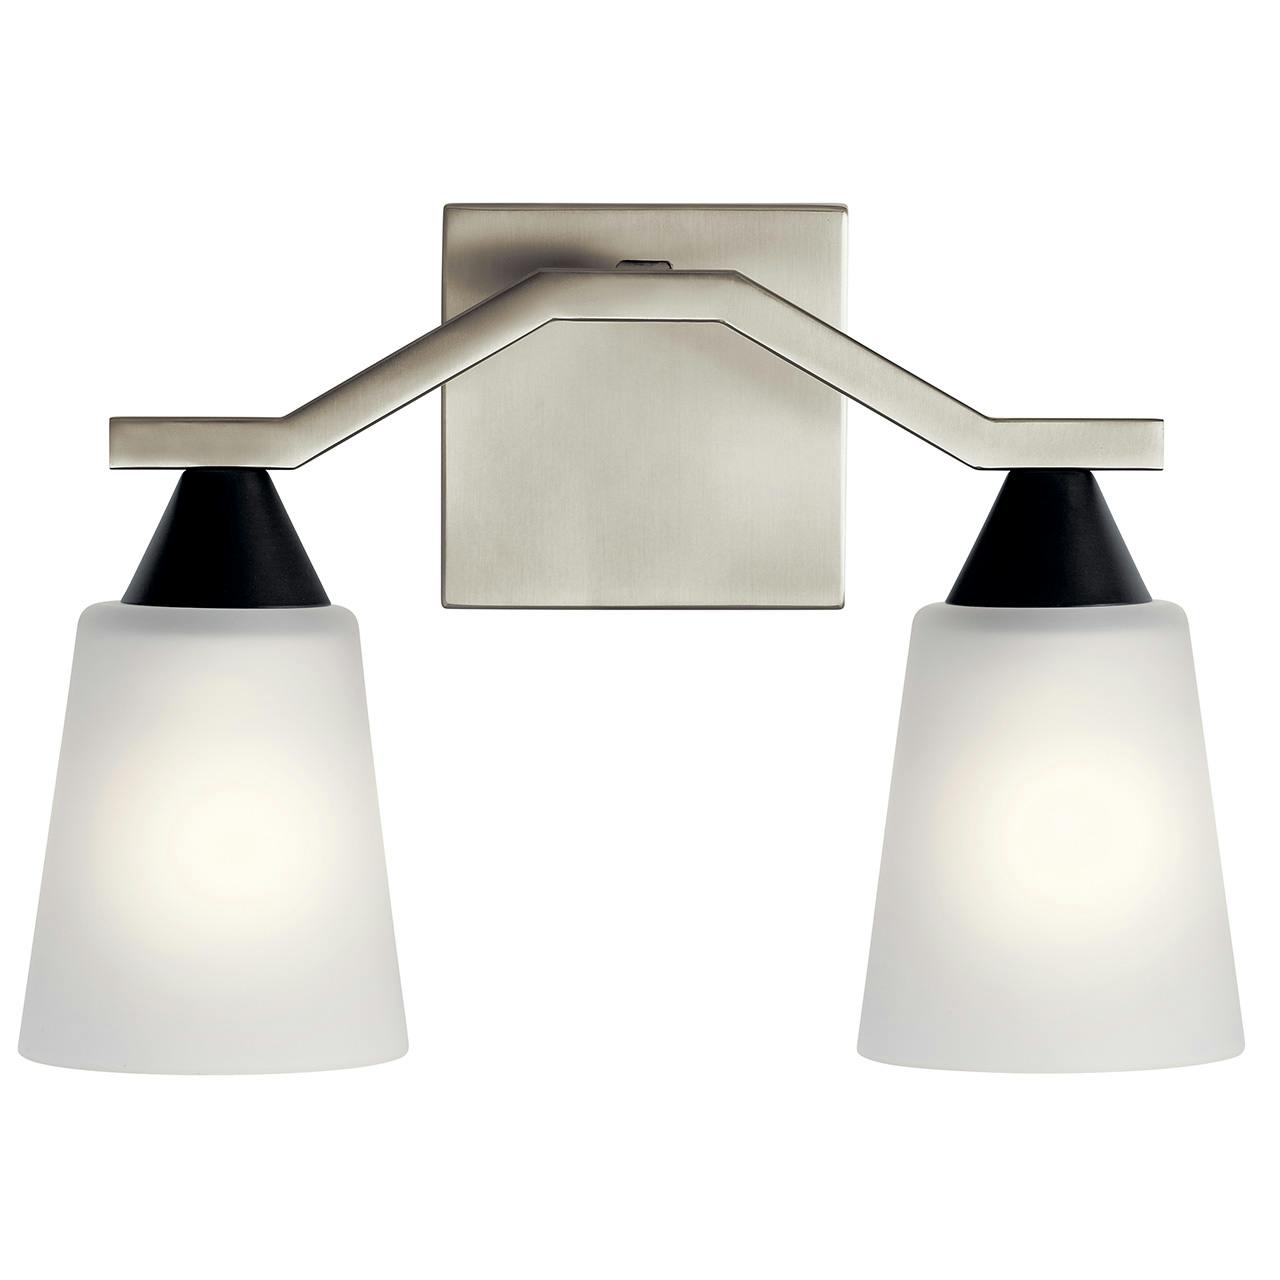 The Skagos 2 Light Vanity Light Nickel facing down on a white background